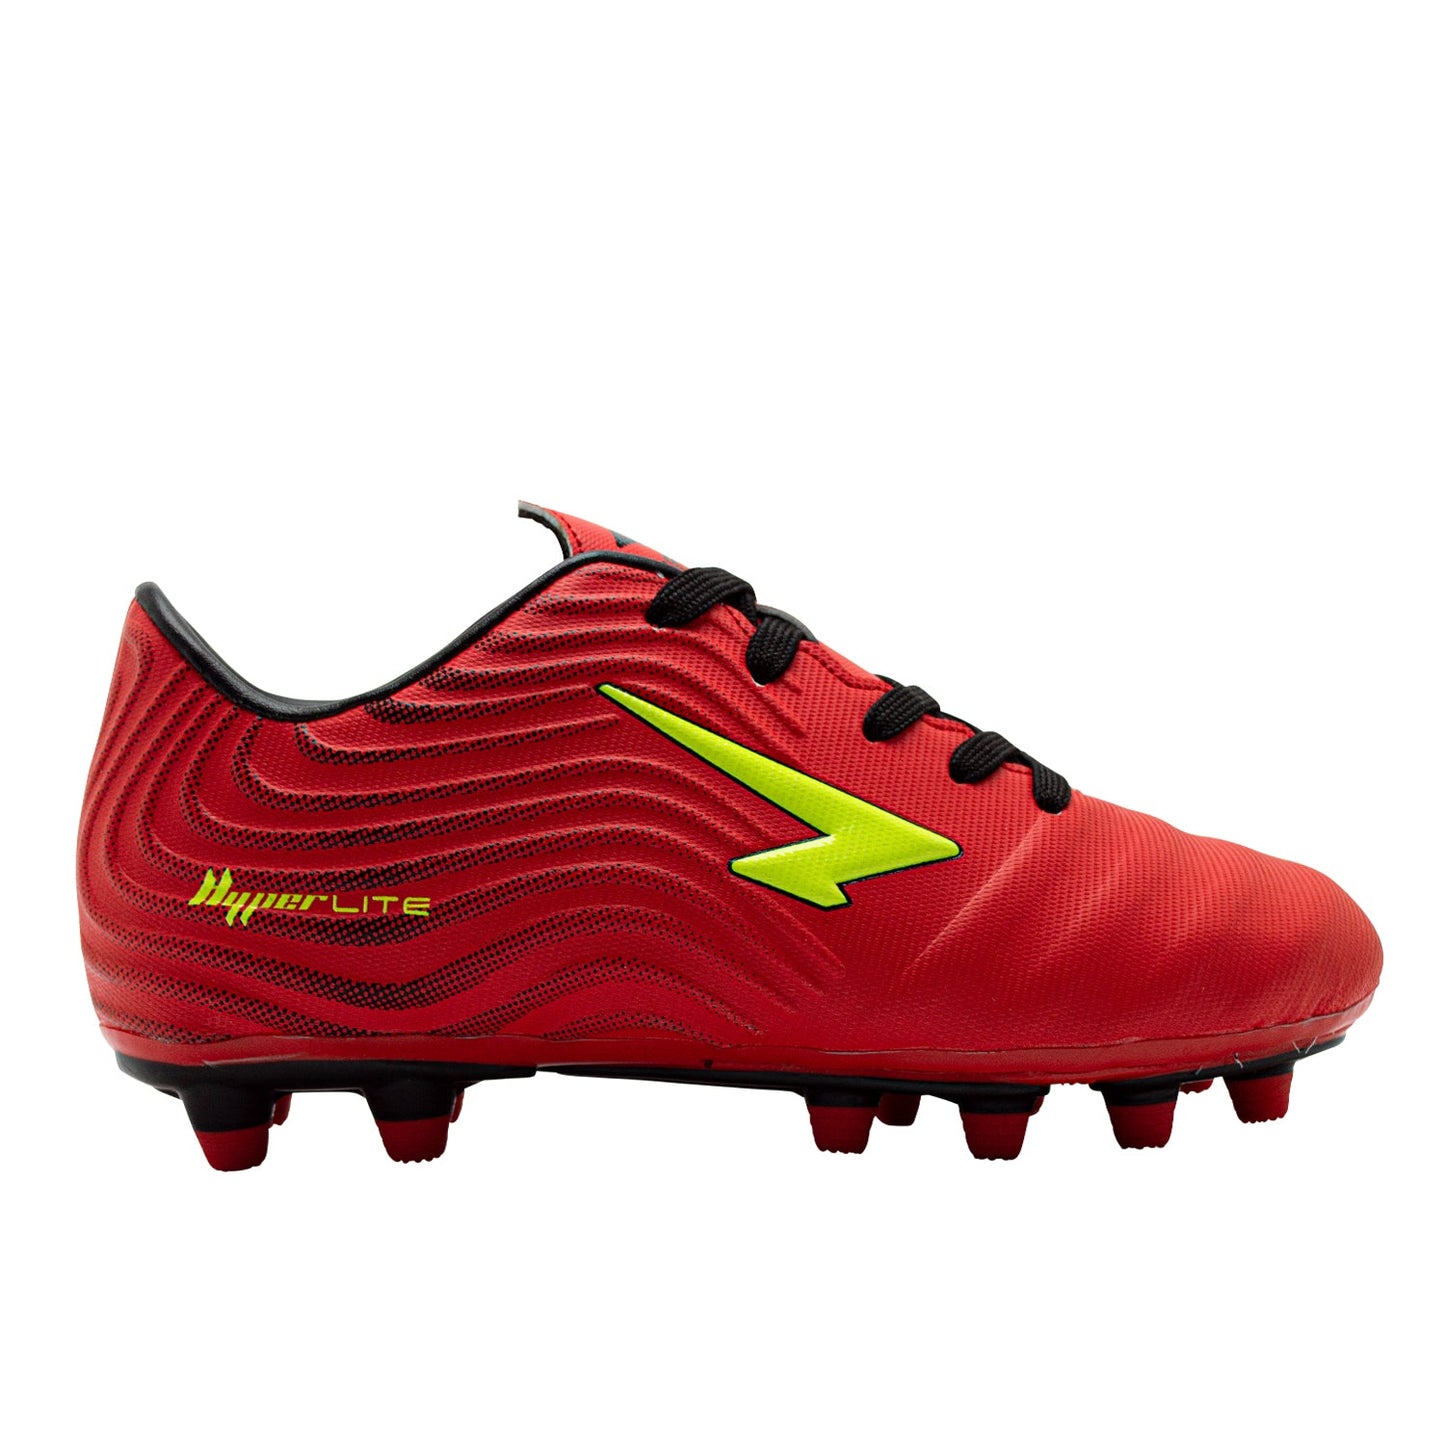 Swell Junior Football Boots - Red/Black/Yellow